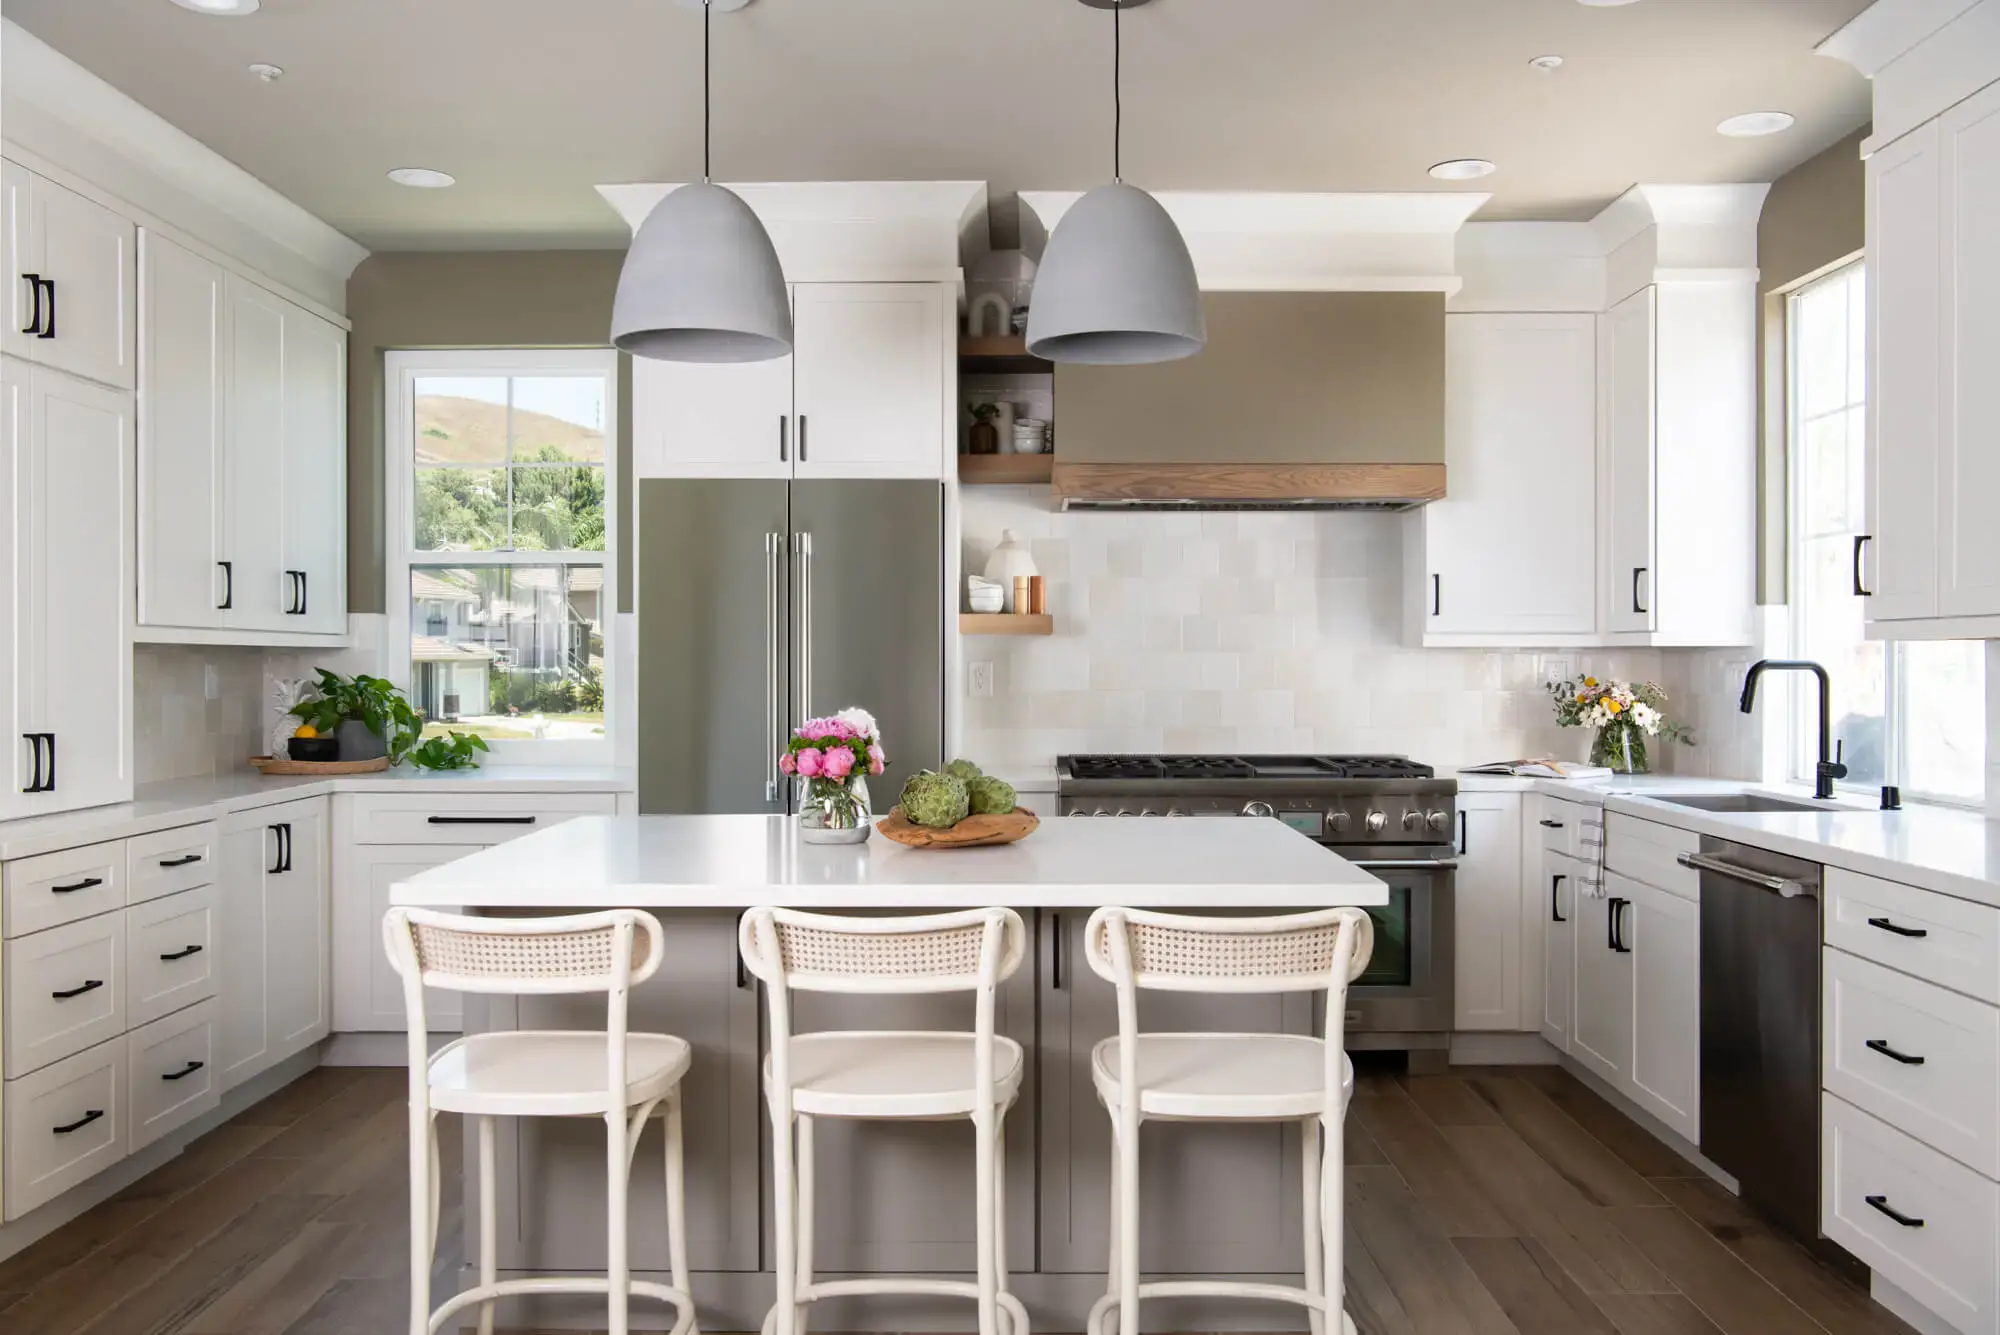 This San Clemente kitchen renovation features plenty of kitchen storage near the range zone - Well-Functioning House